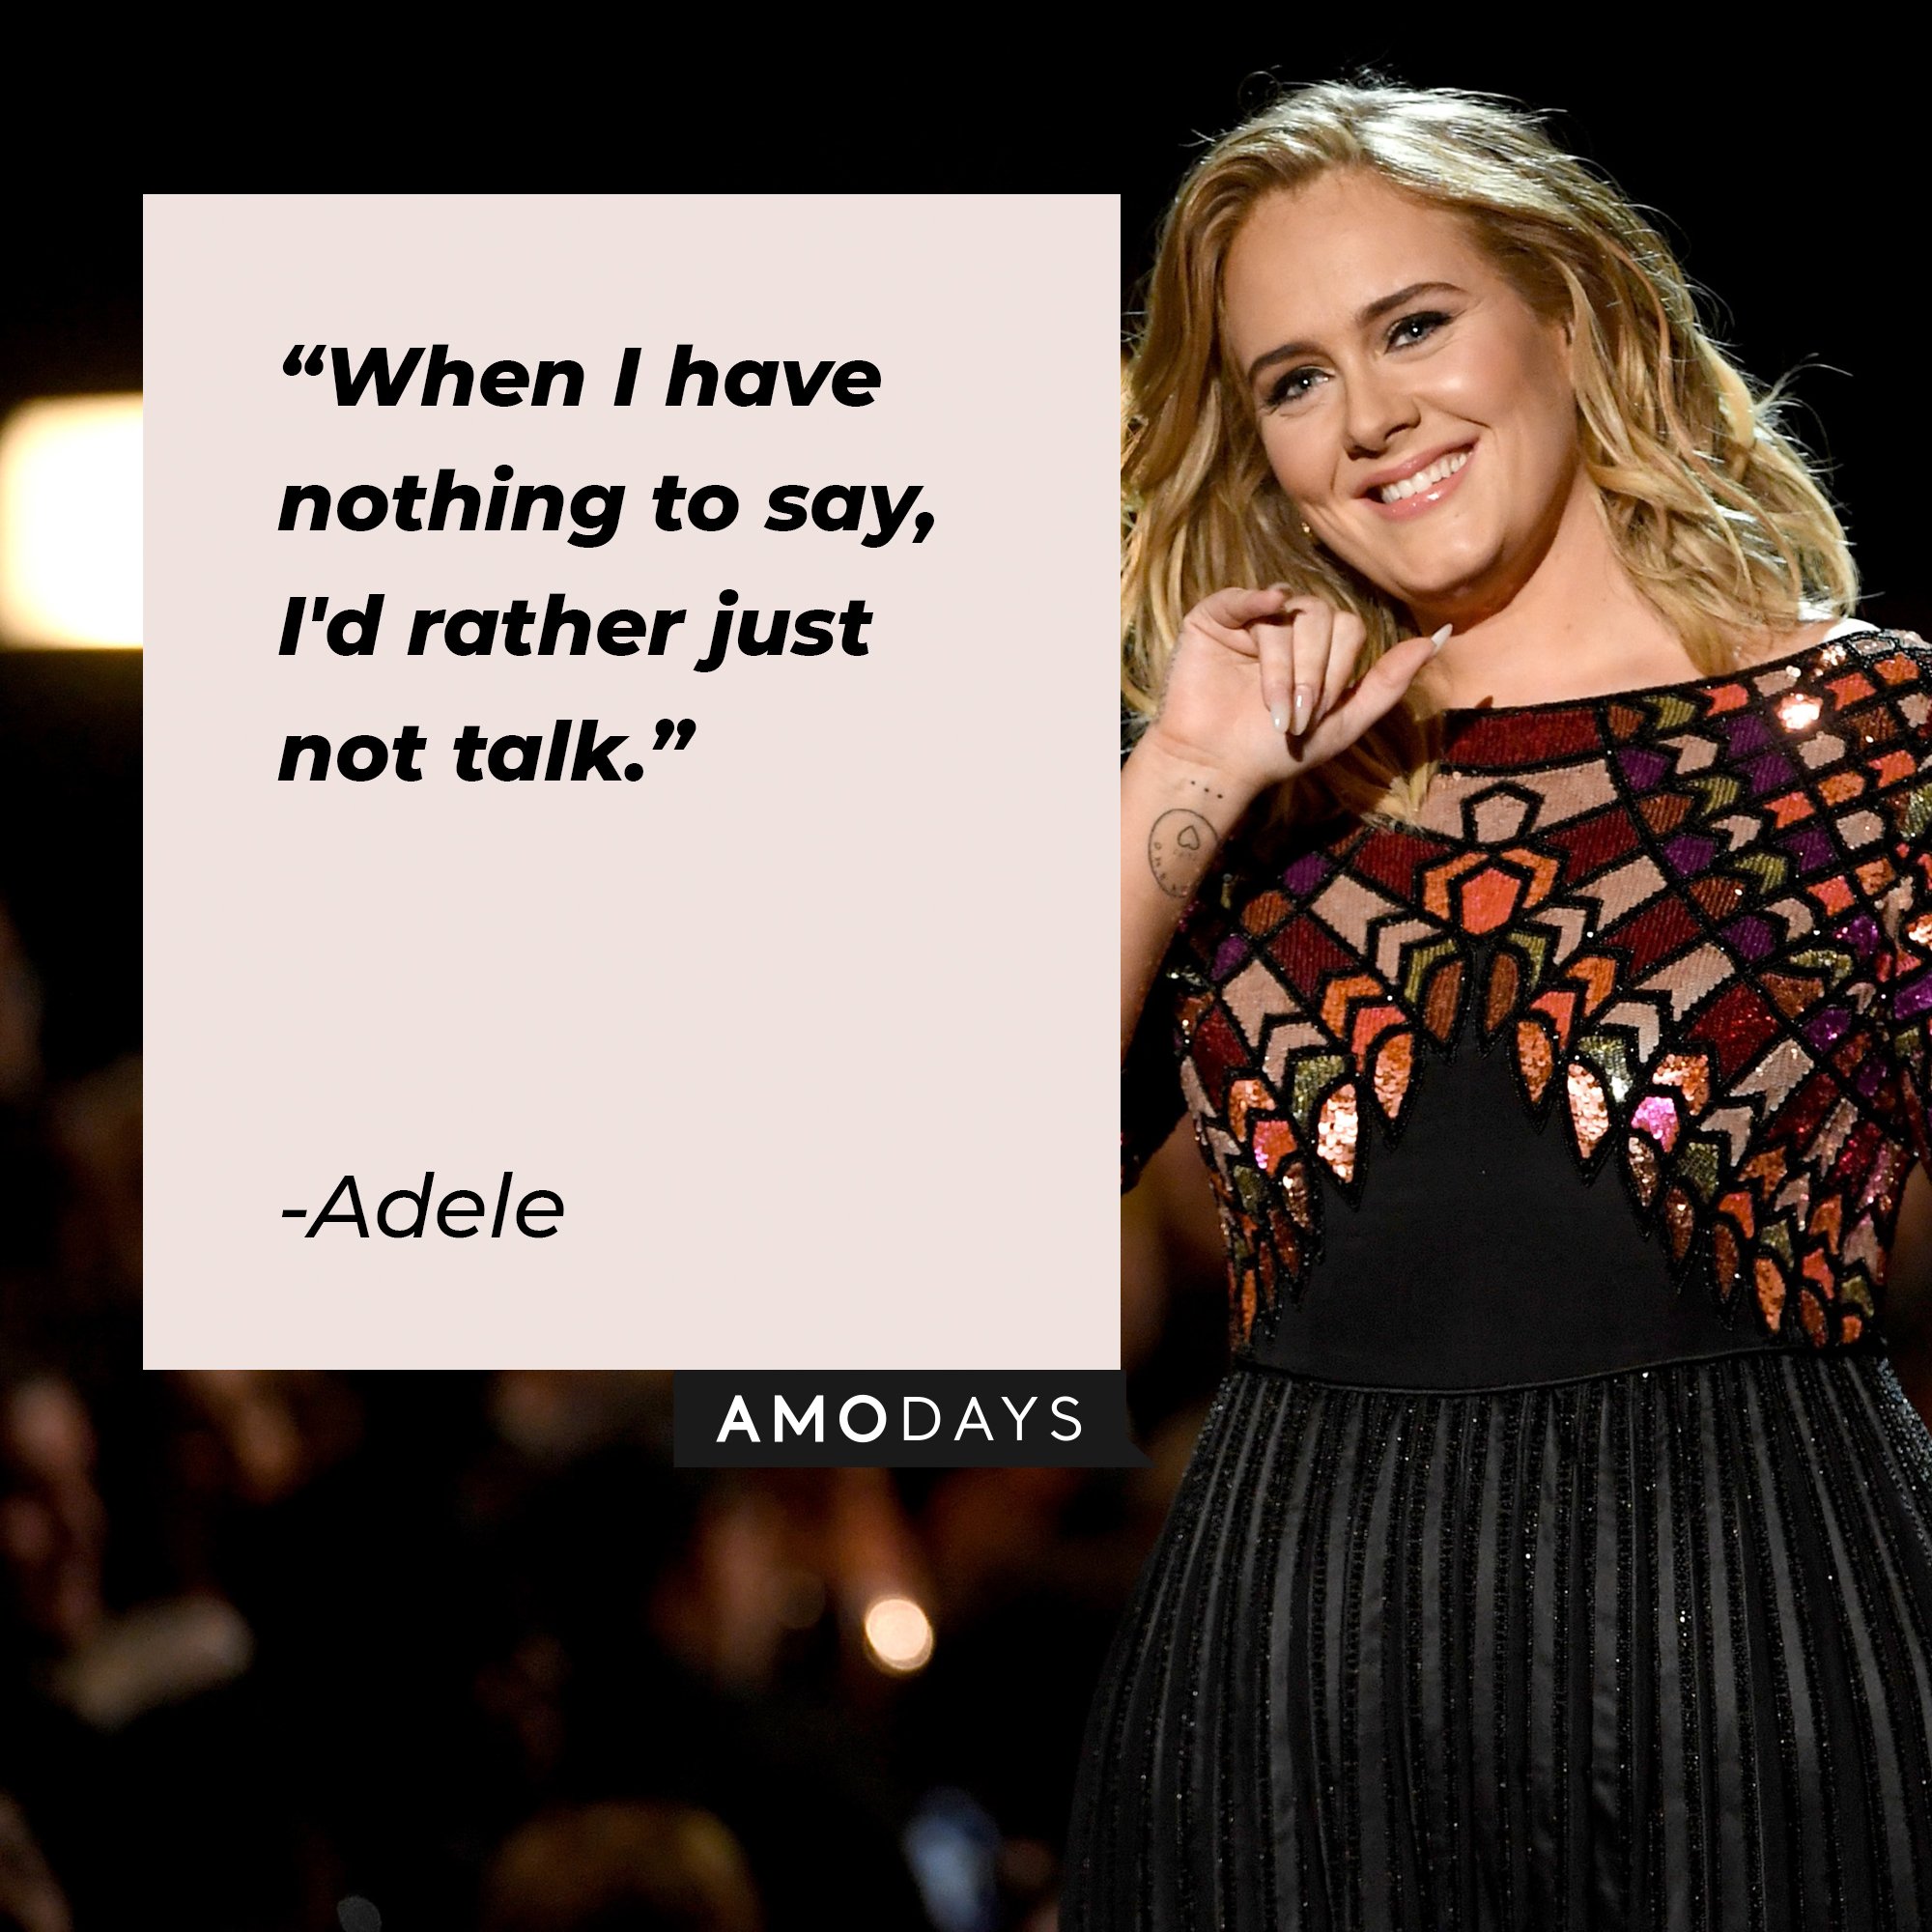 Adele’s quote "When I have nothing to say, I'd rather just not talk." | Image: AmoDays